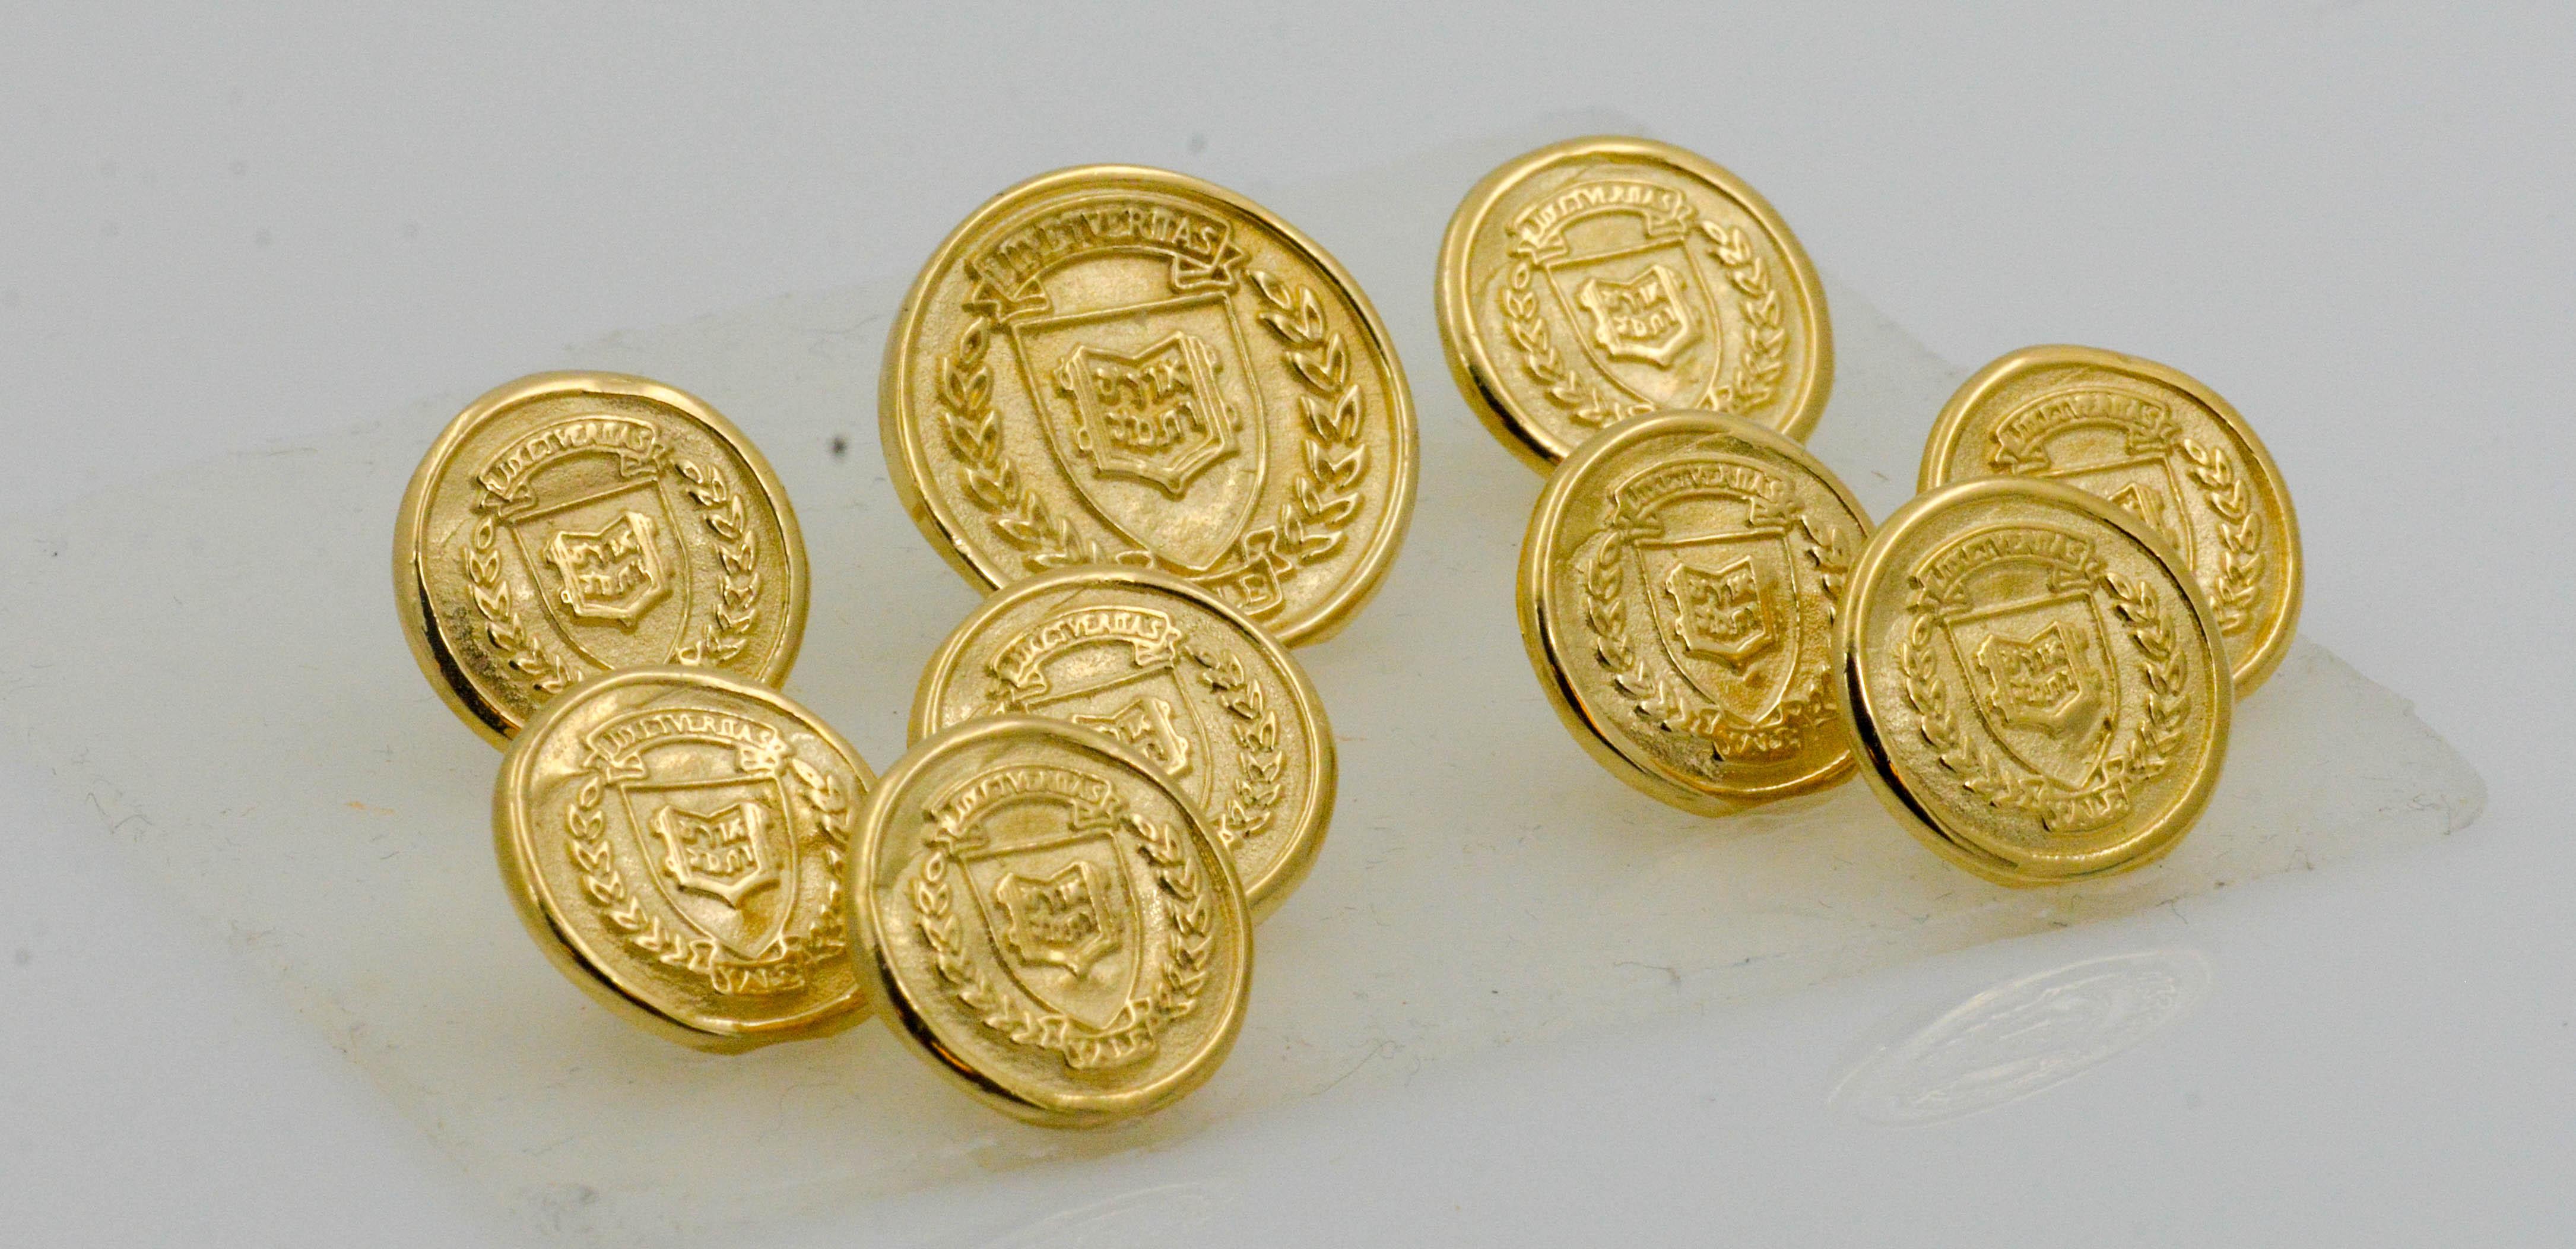 Traditional and Vintage Yale University Coat of Arms buttons were manufactured by The Waterbury Button Company; the oldest button company in the United States. Buttons are set in 14K yellow gold and the backs are completed with a fully soldered